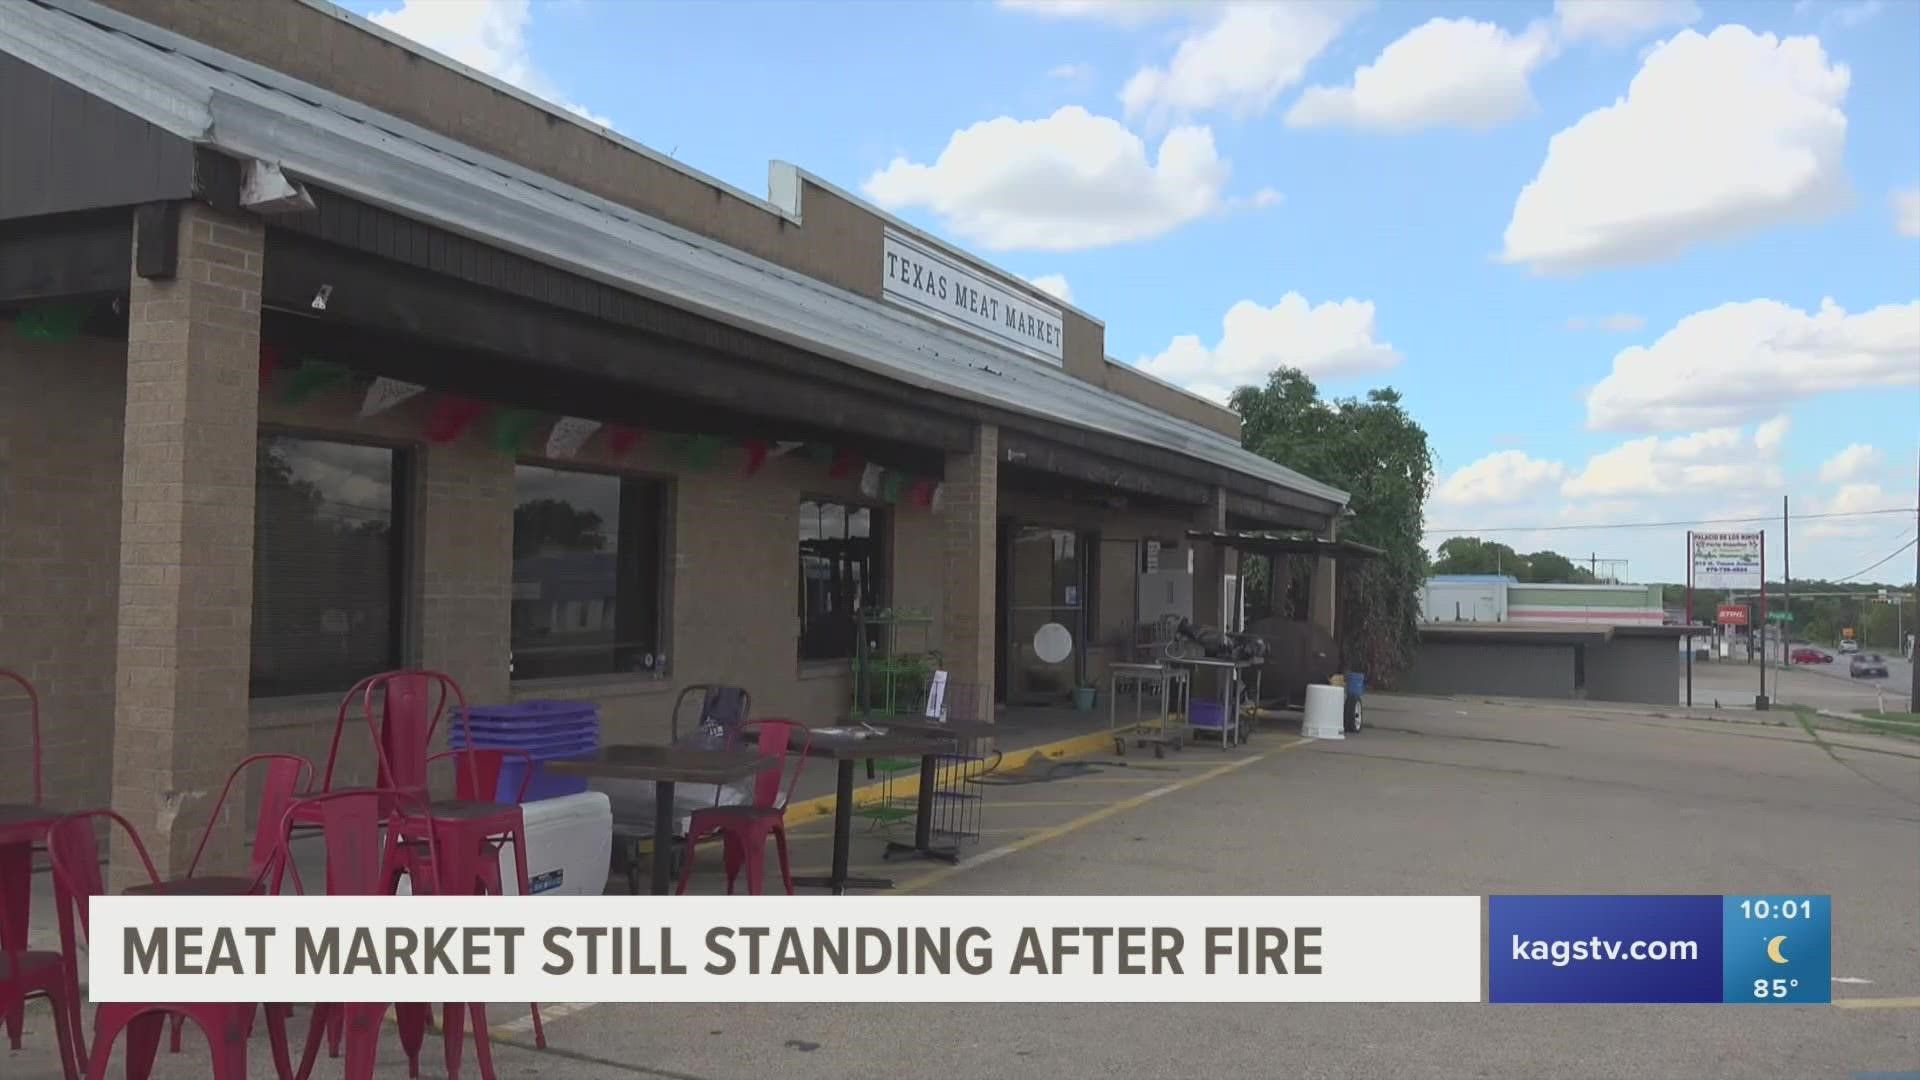 Texas Meat Market owner Laura Mendez is turning tragedy into a victory after a fire tore through her store on Tues, Aug. 23.